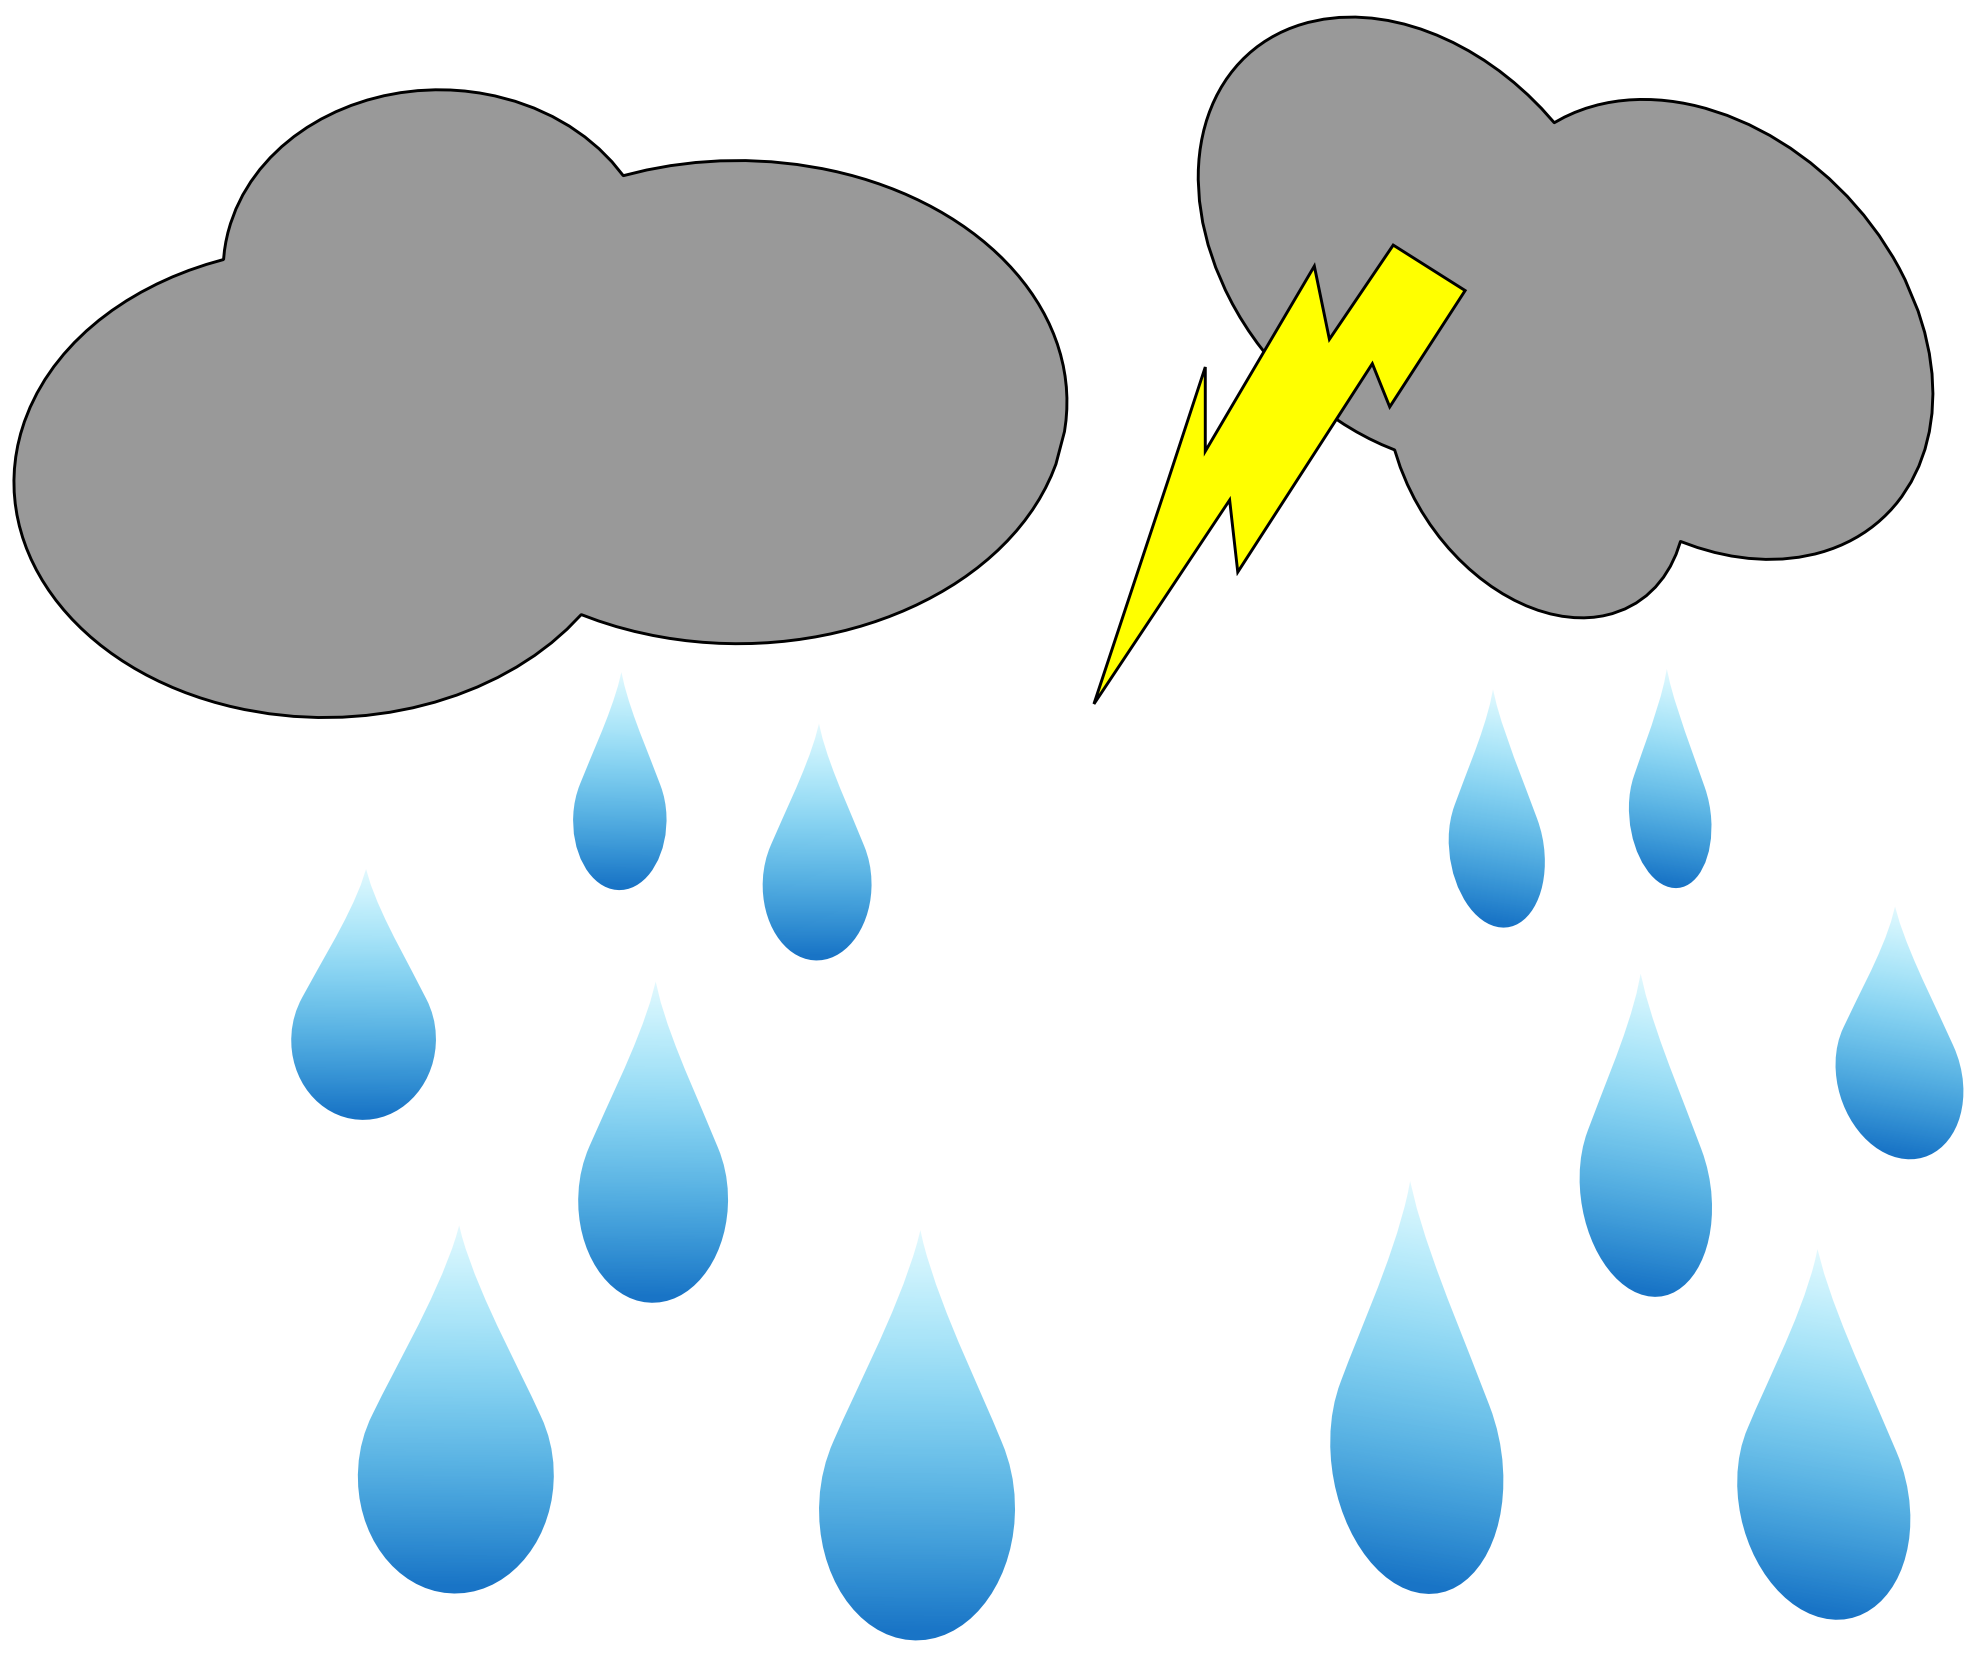 Puddle drawing at getdrawings. Lightning clipart rainy cloud